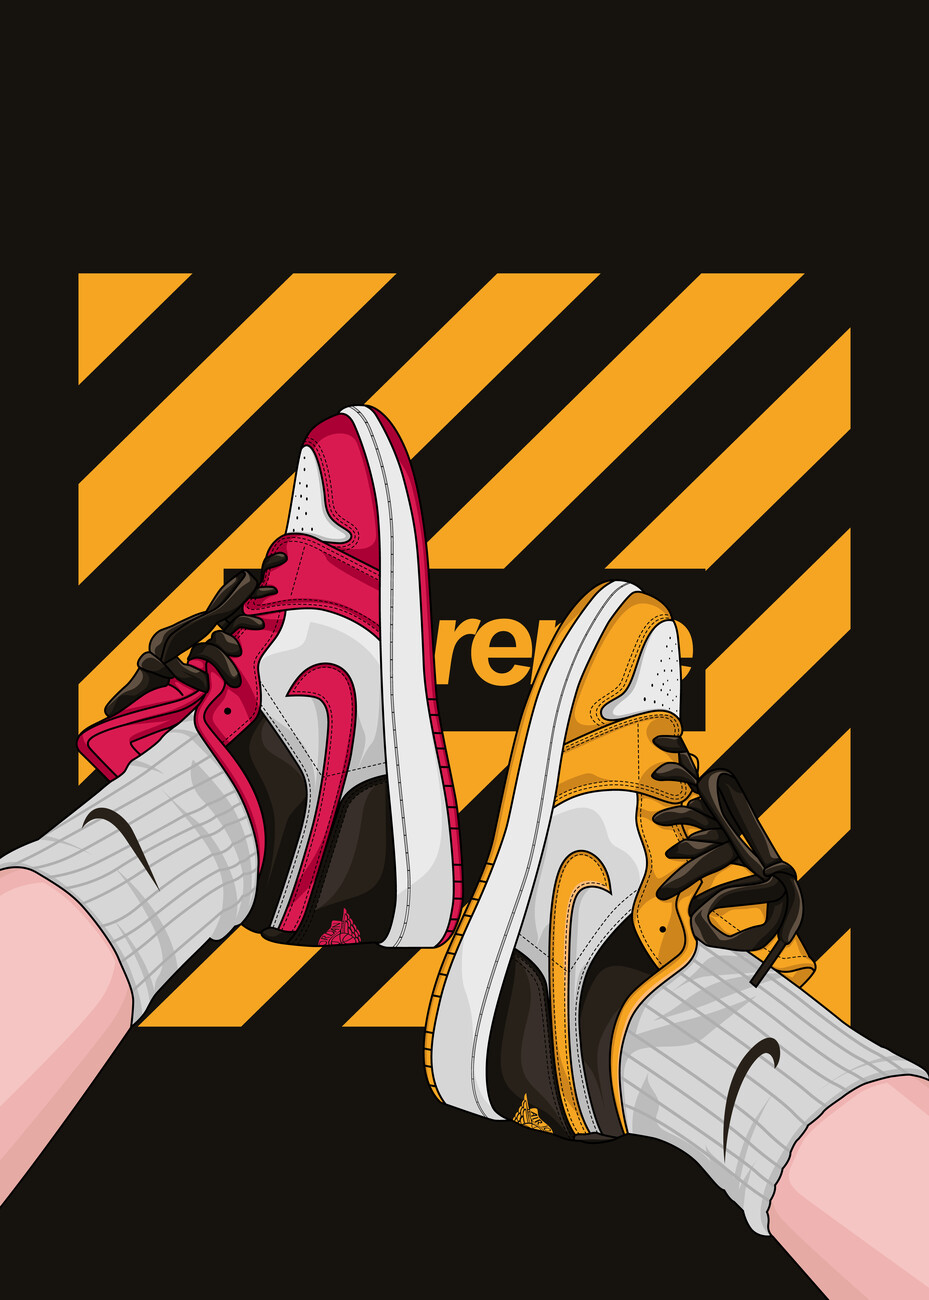 Wall Art Print Sneaker addict Collector | Gifts & Merchandise | Europosters